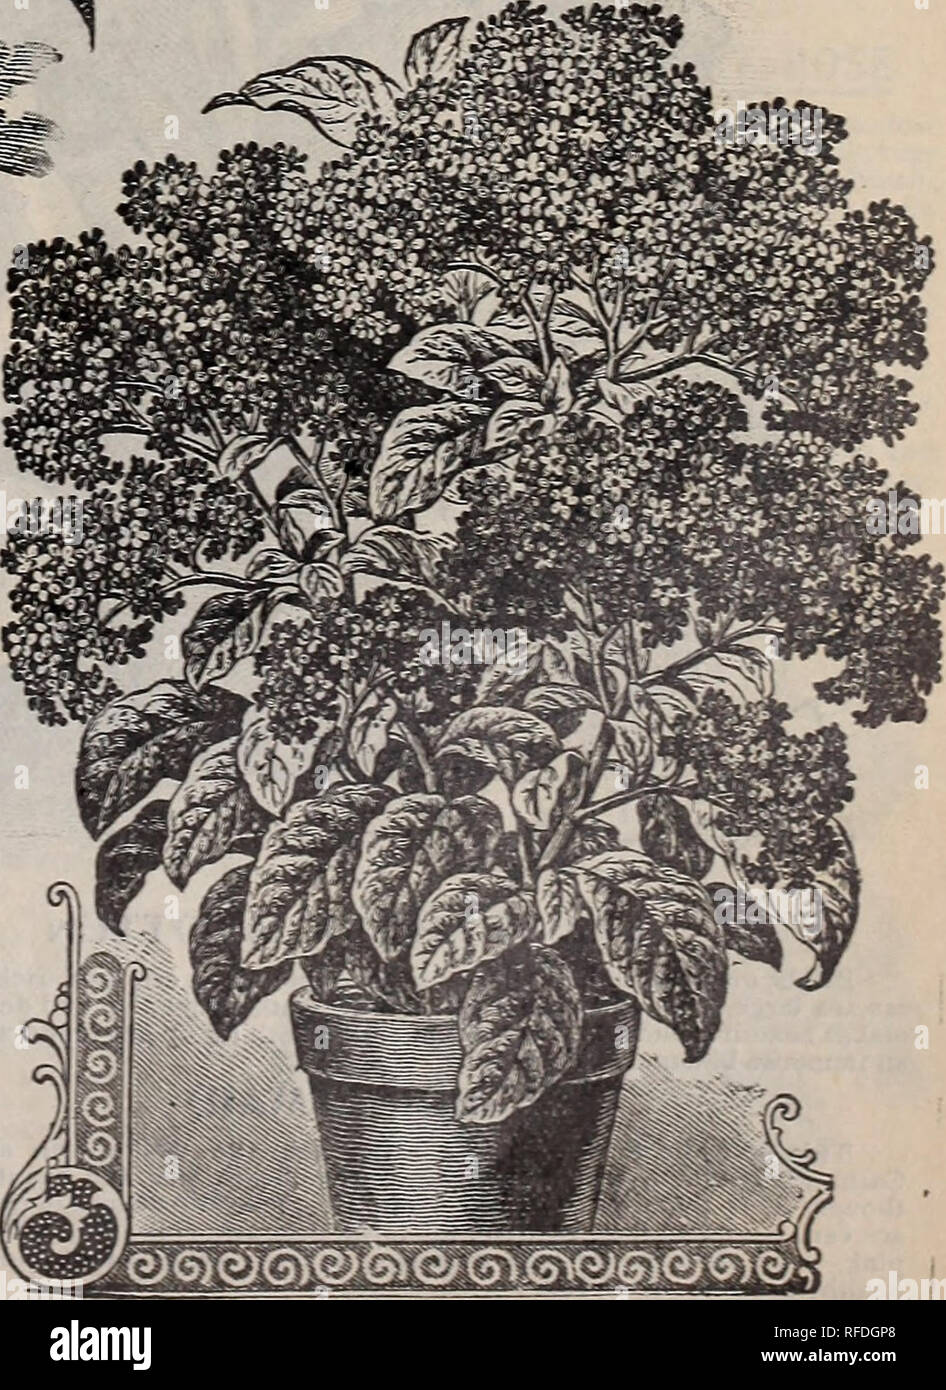 . Catalogue : 1902. Nursery stock Ontario Toronto Catalogs; Vegetables Seeds Catalogs; Flowers Seeds Catalogs; Plants, Ornamental Catalogs; Bulbs (Plants) Catalogs; Fruit Catalogs; Agricultural implements Catalogs. GTNURA AURANTIACA (VELVET PLANT) BOSTON SWORD FERN GYNURA AURANTIACA (Velvet PlantI One of the rsrest and most beautiful foliage plants in cultivation. It is of exceedingly robust and branching growth, yet remains dwarf and com- pact. The leaves and stems are entirely covered with minute hairs, shining, glisten- ing, reflecting many delight- fully new colors, such as peculiar and be Stock Photo